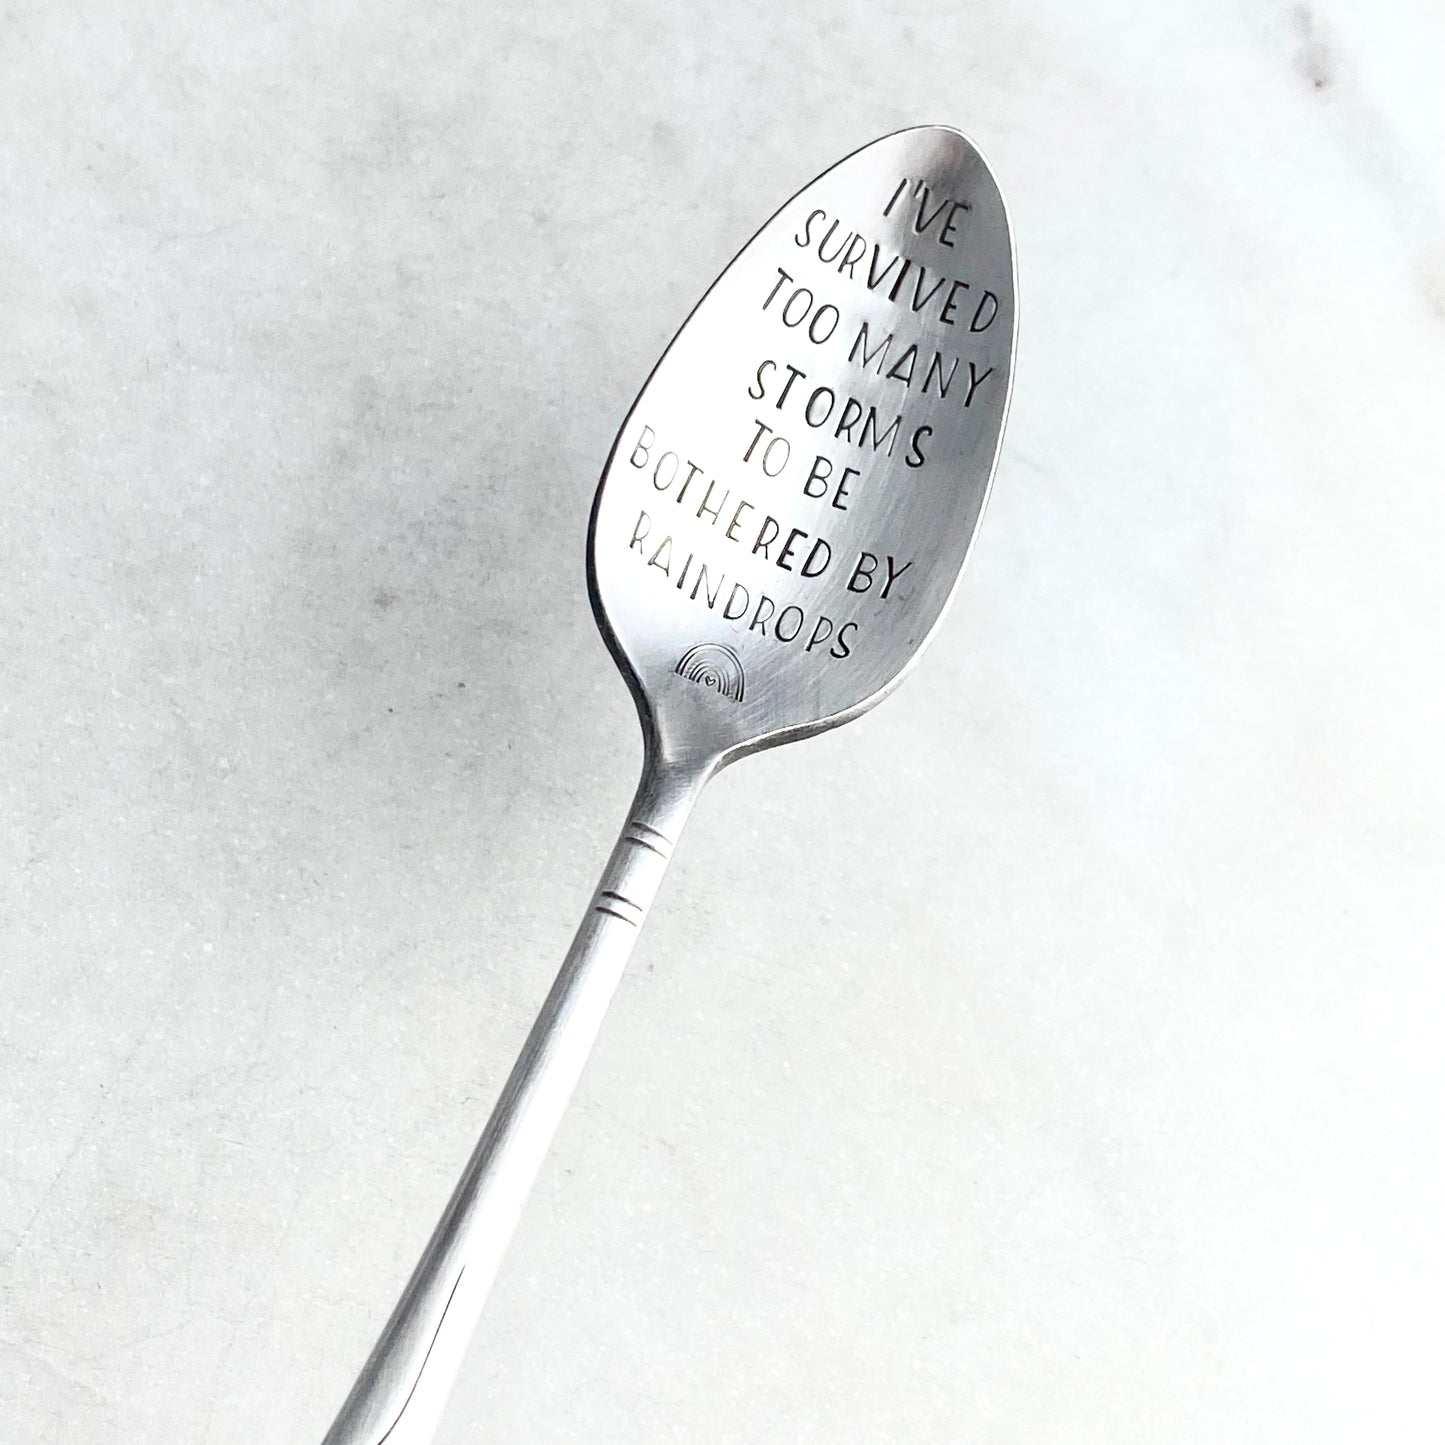 I've Survived Too Many Storms to be Bothered by Raindrops, Hand Stamped Vintage Spoon Spoons callistafaye   